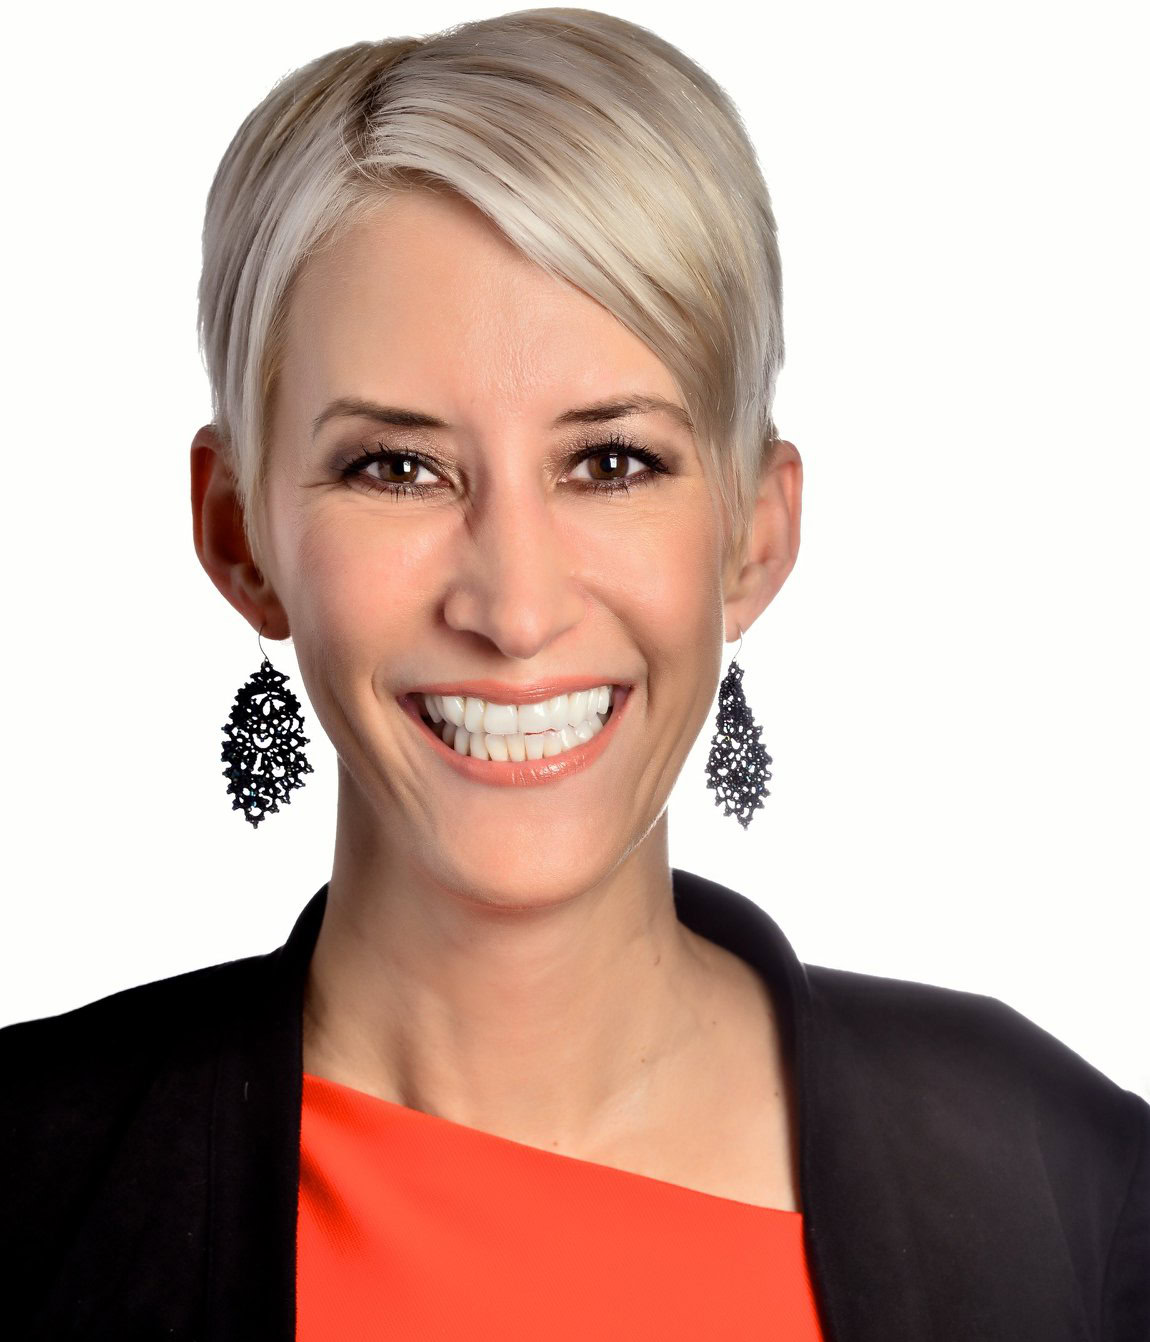 Jennifer K Hill, a woman with short blonde hair and large black earrings, smiling in a red top against a white background.